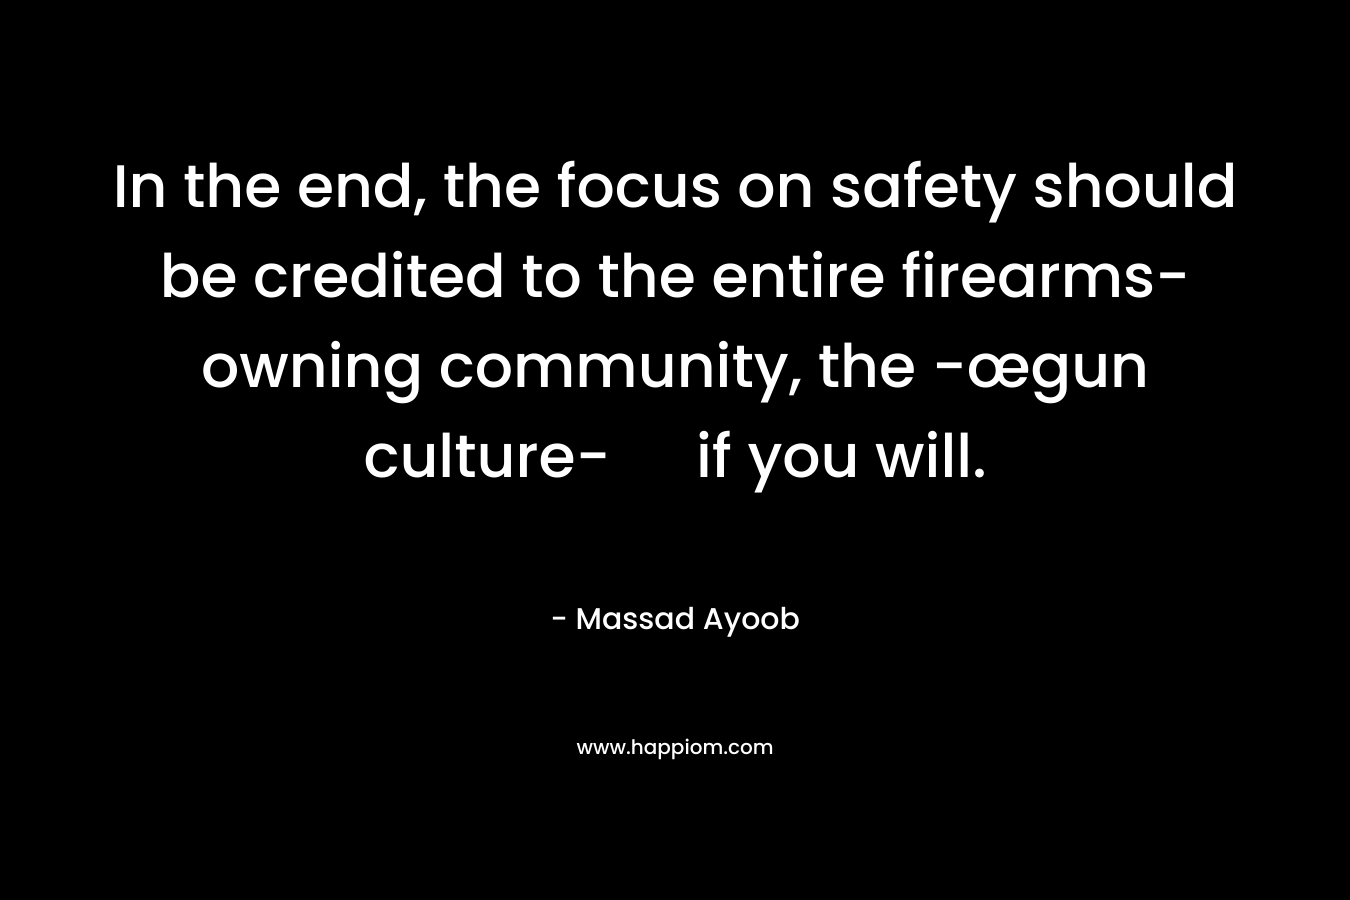 In the end, the focus on safety should be credited to the entire firearms-owning community, the -œgun culture- if you will. – Massad Ayoob